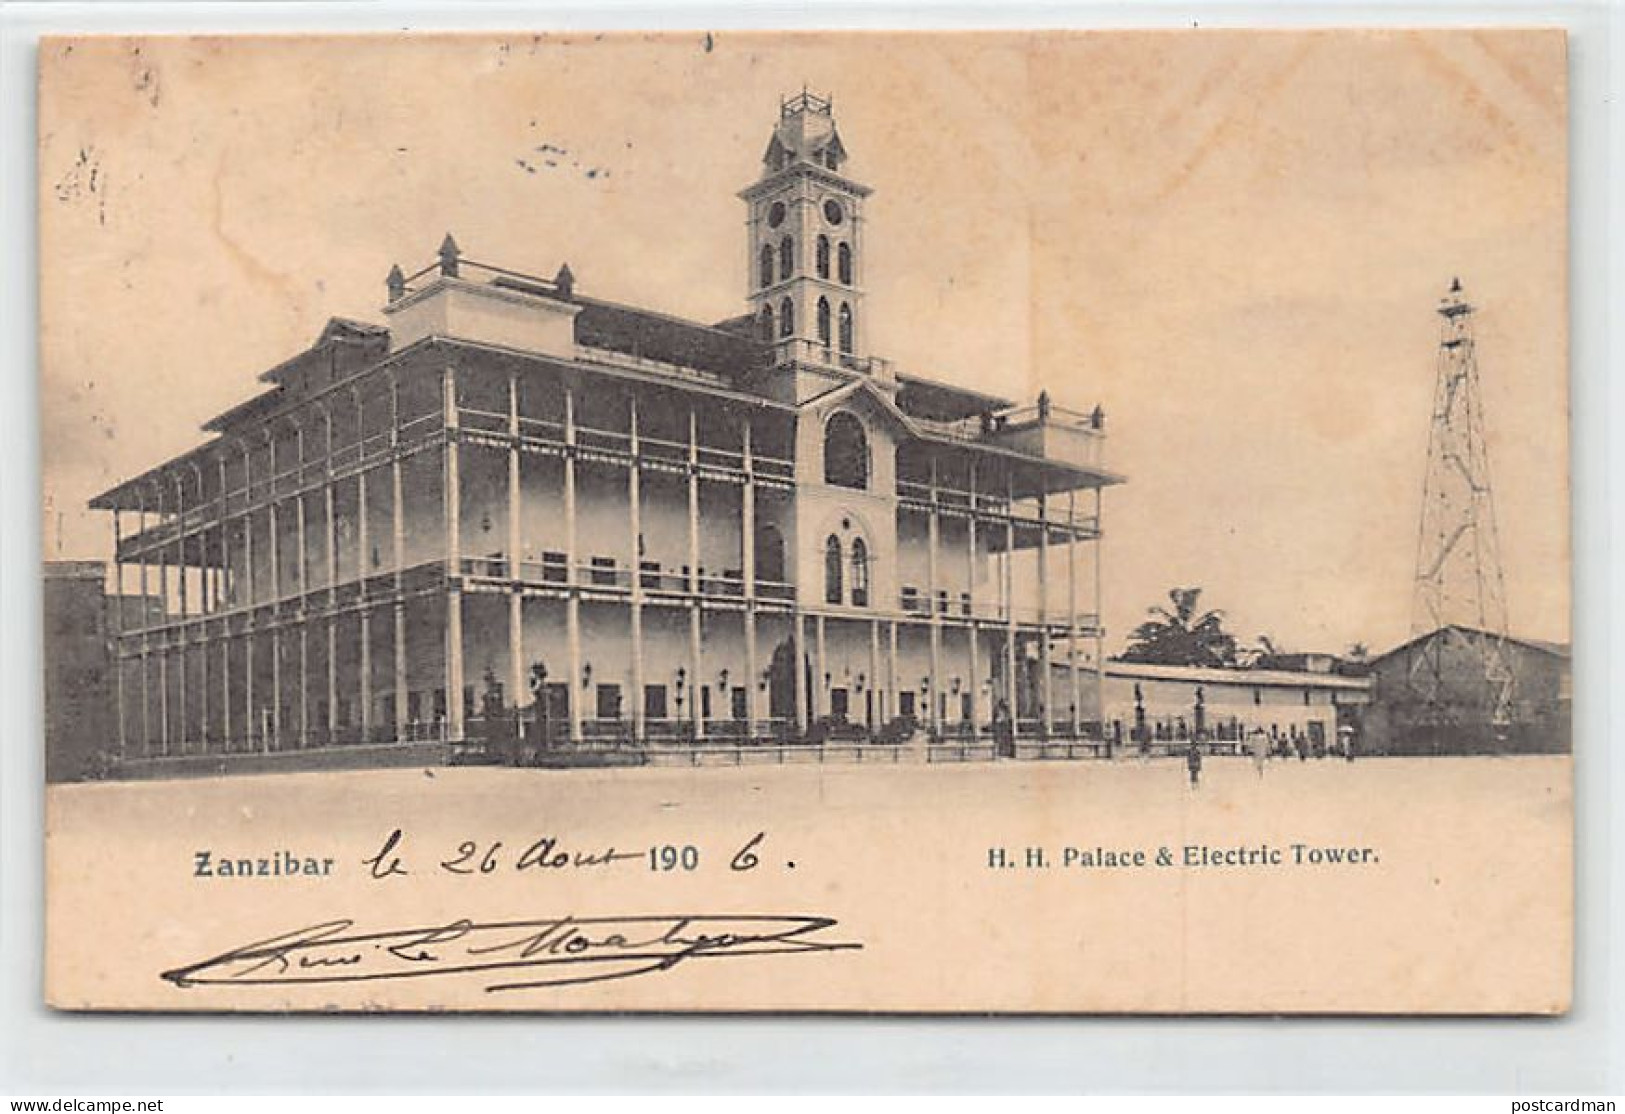 Tanzania - ZANZIBAR - H.H. Palace And Electric Tower - POSTCARD IS UNSTICKED - Publ. Pereira De Lord Brothers  - Tanzanía